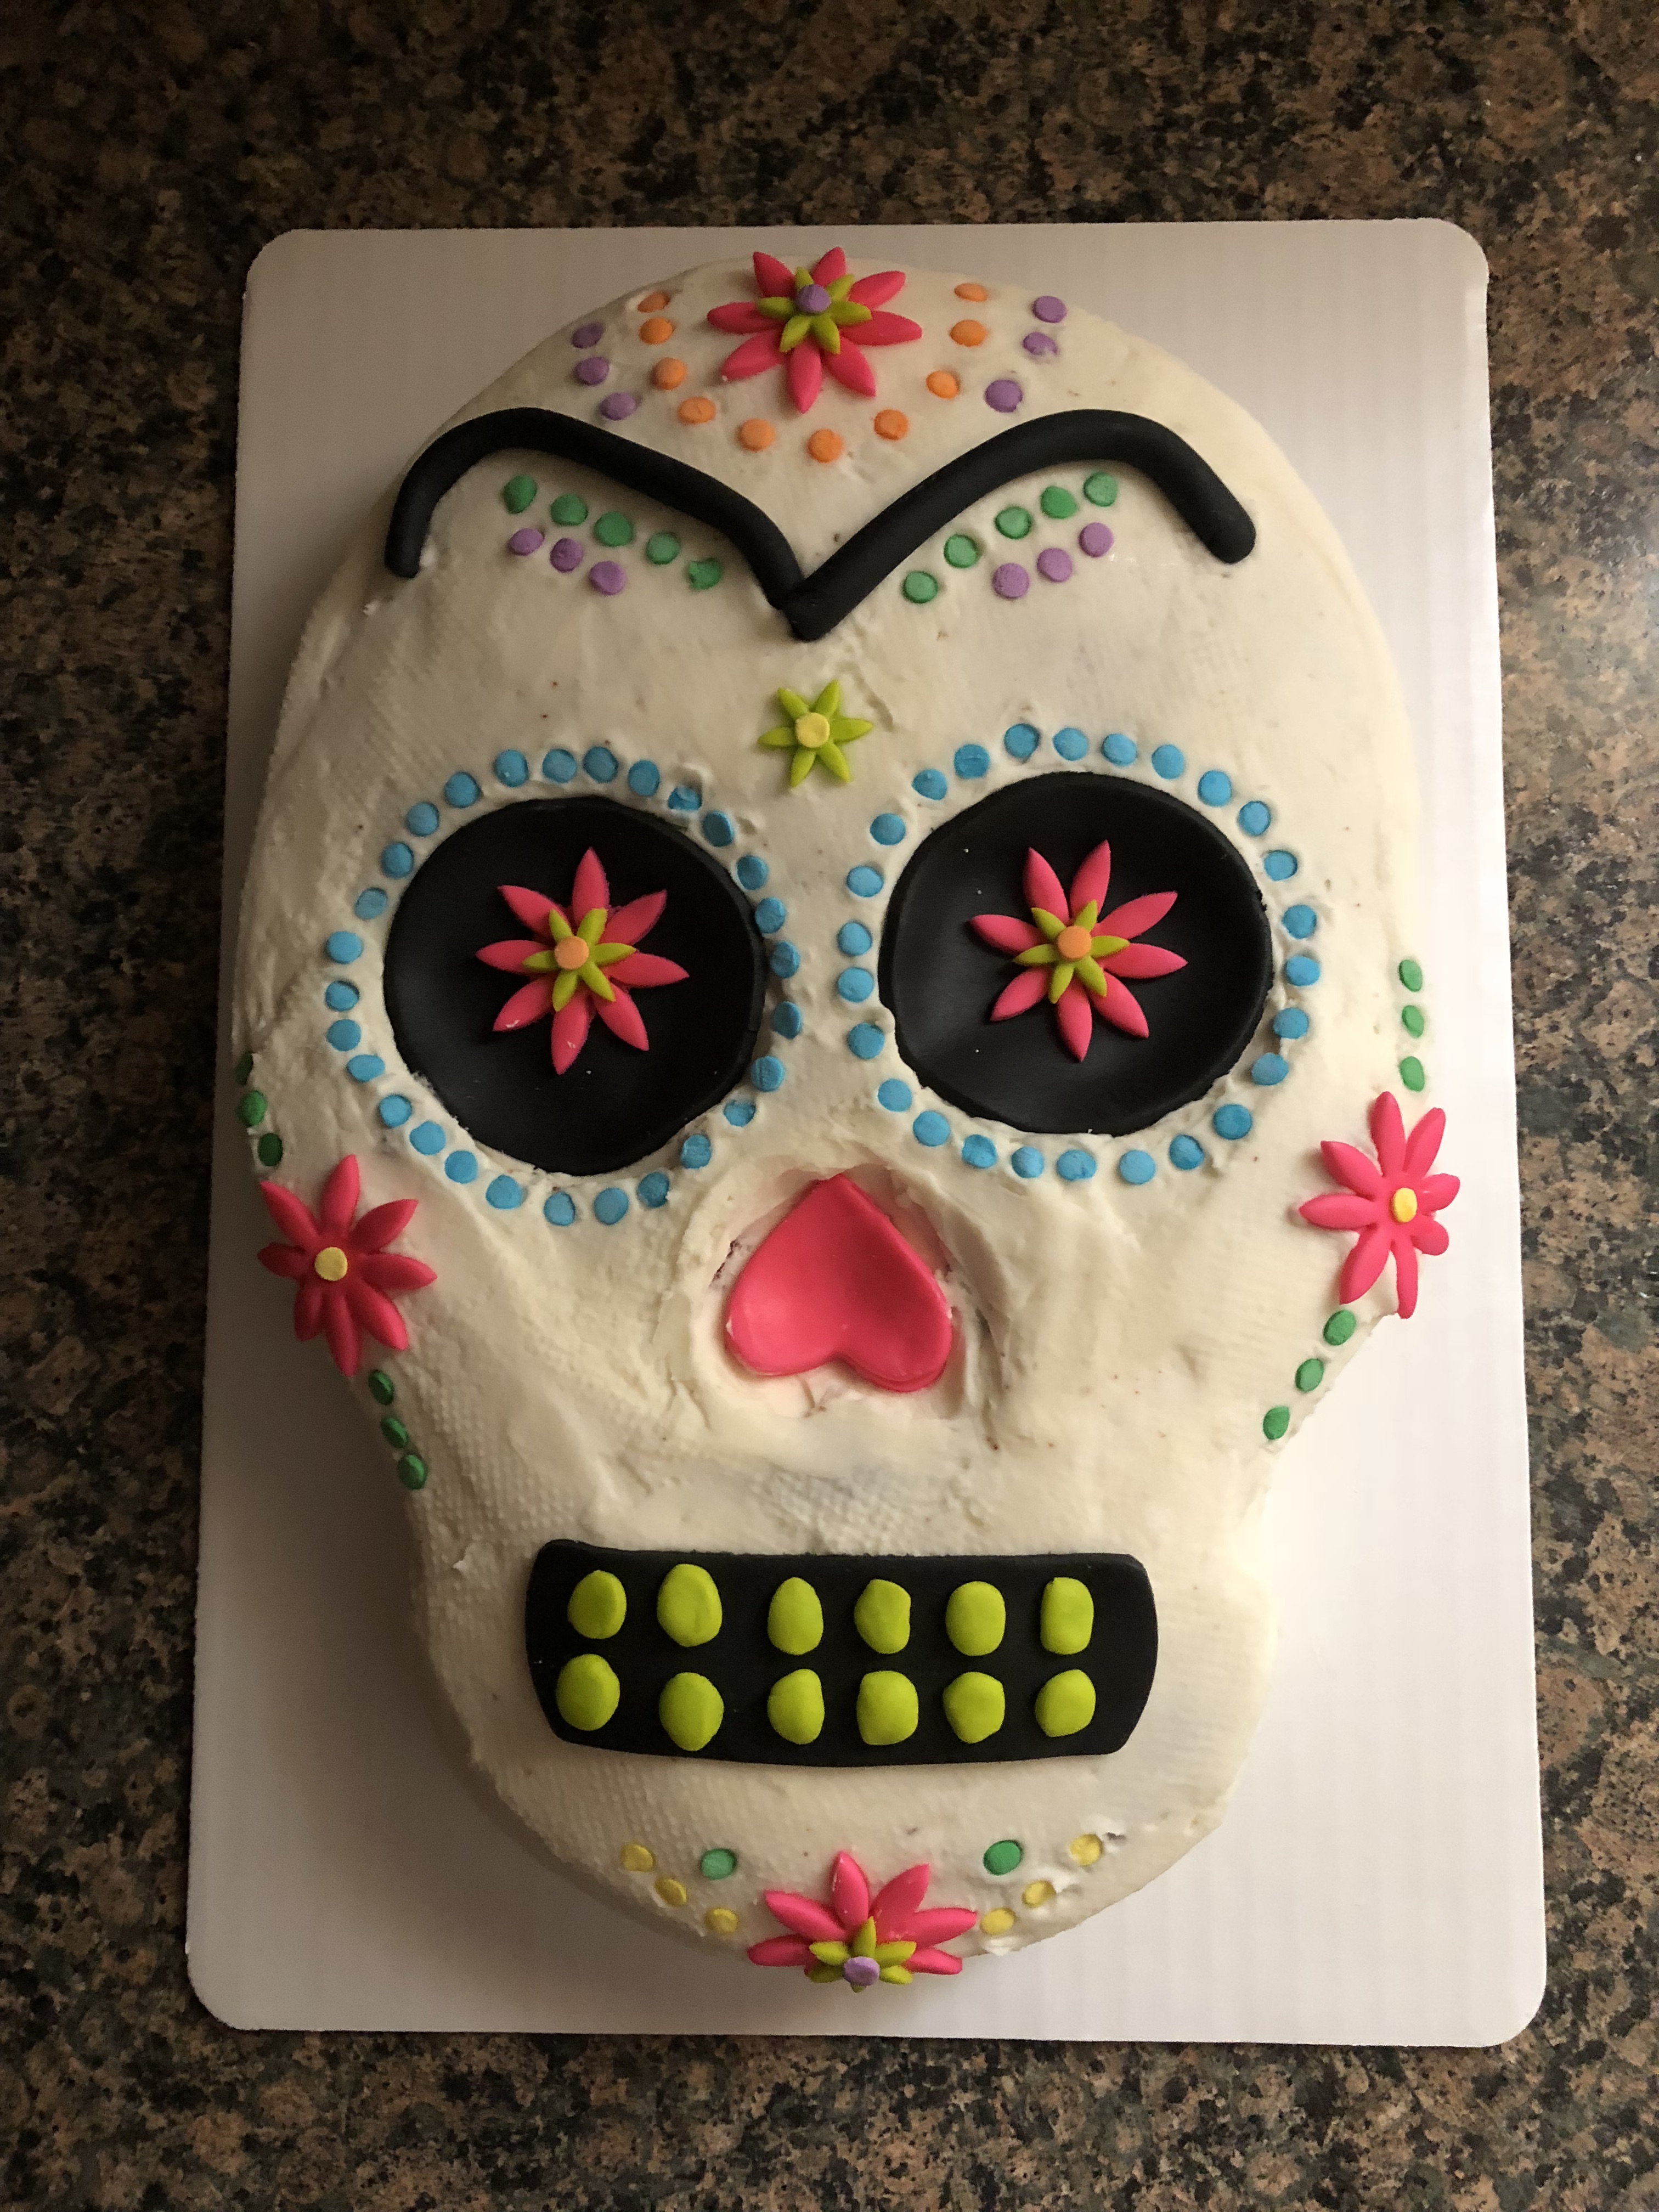 This Genius Hack Is Perfect For A Spooky Skull Cake